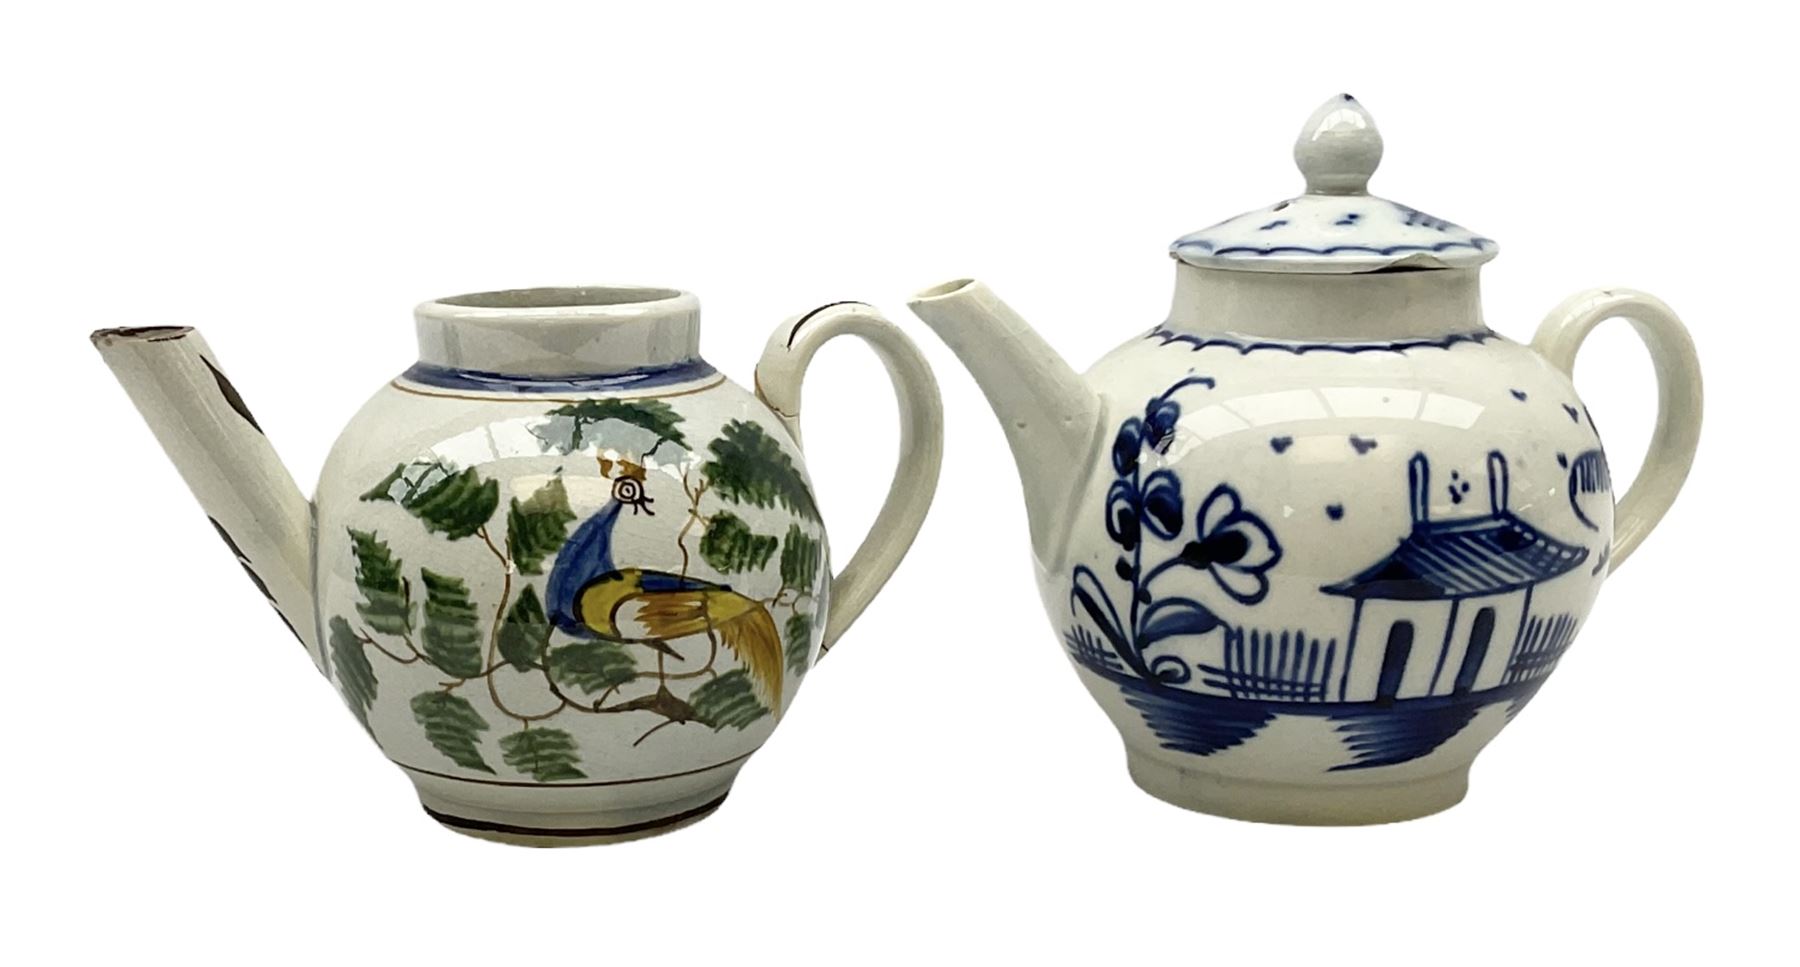 Two 18th century miniature or toy pearlware teapots